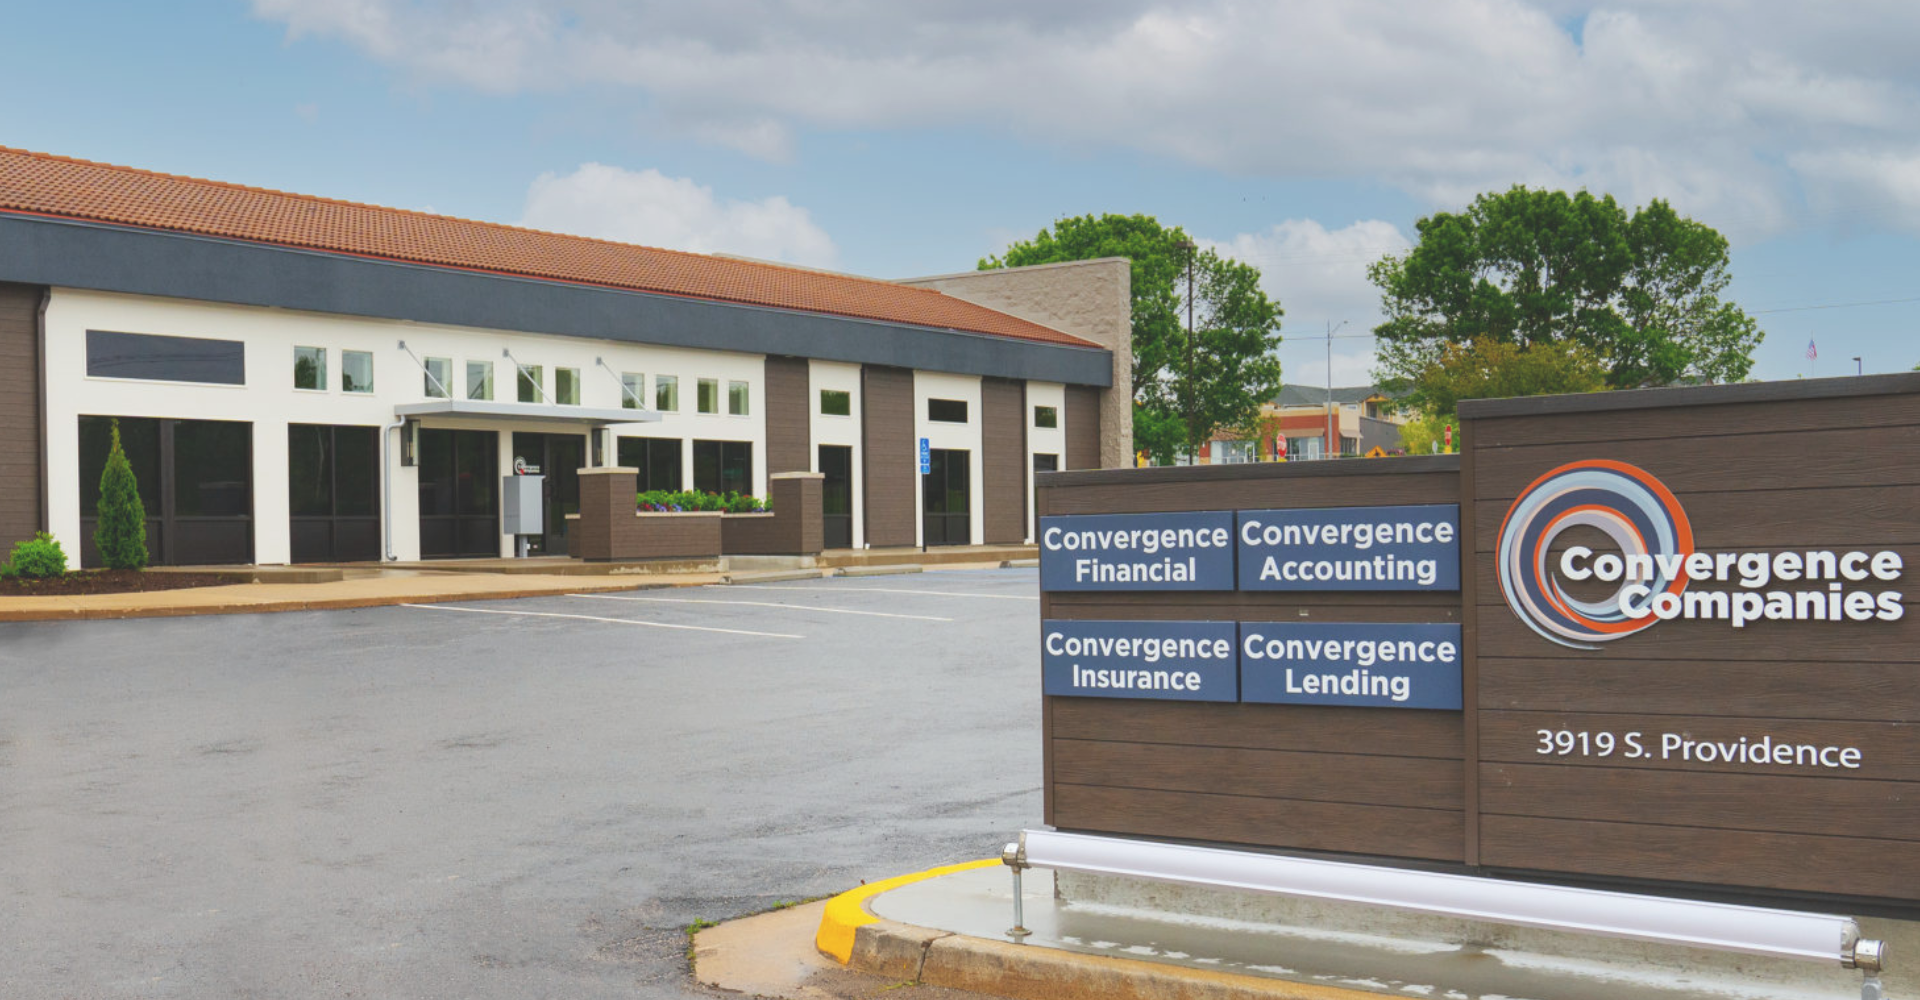 Exterior of Convergence Companies building